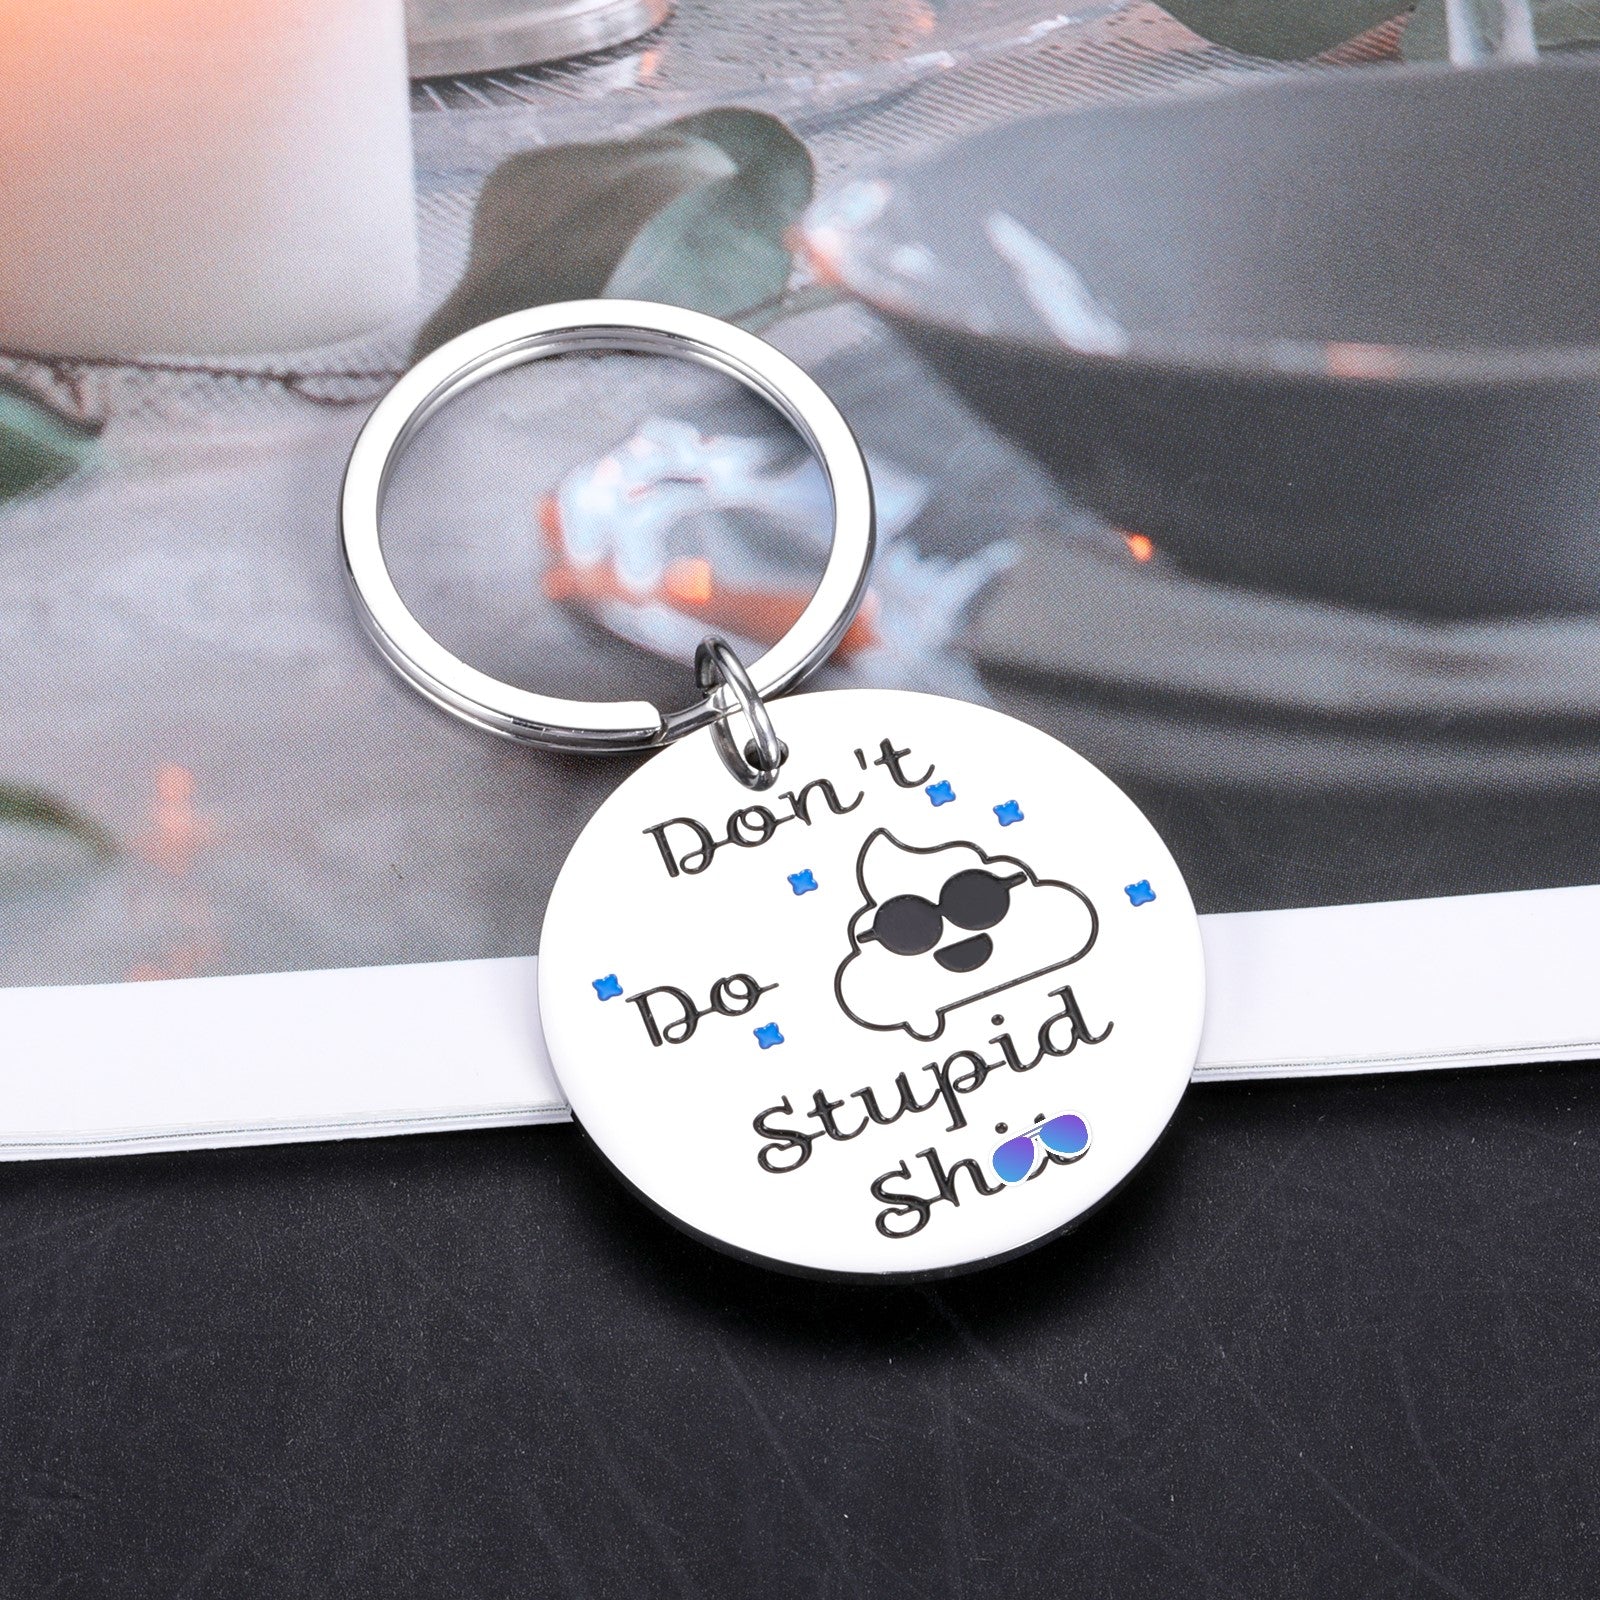 Don't Do Stupid Shit, Funny Keychain Personalized, Christmas Gifts for  Teen, Gift From Mom, Teen Gift, Graduation Gift 